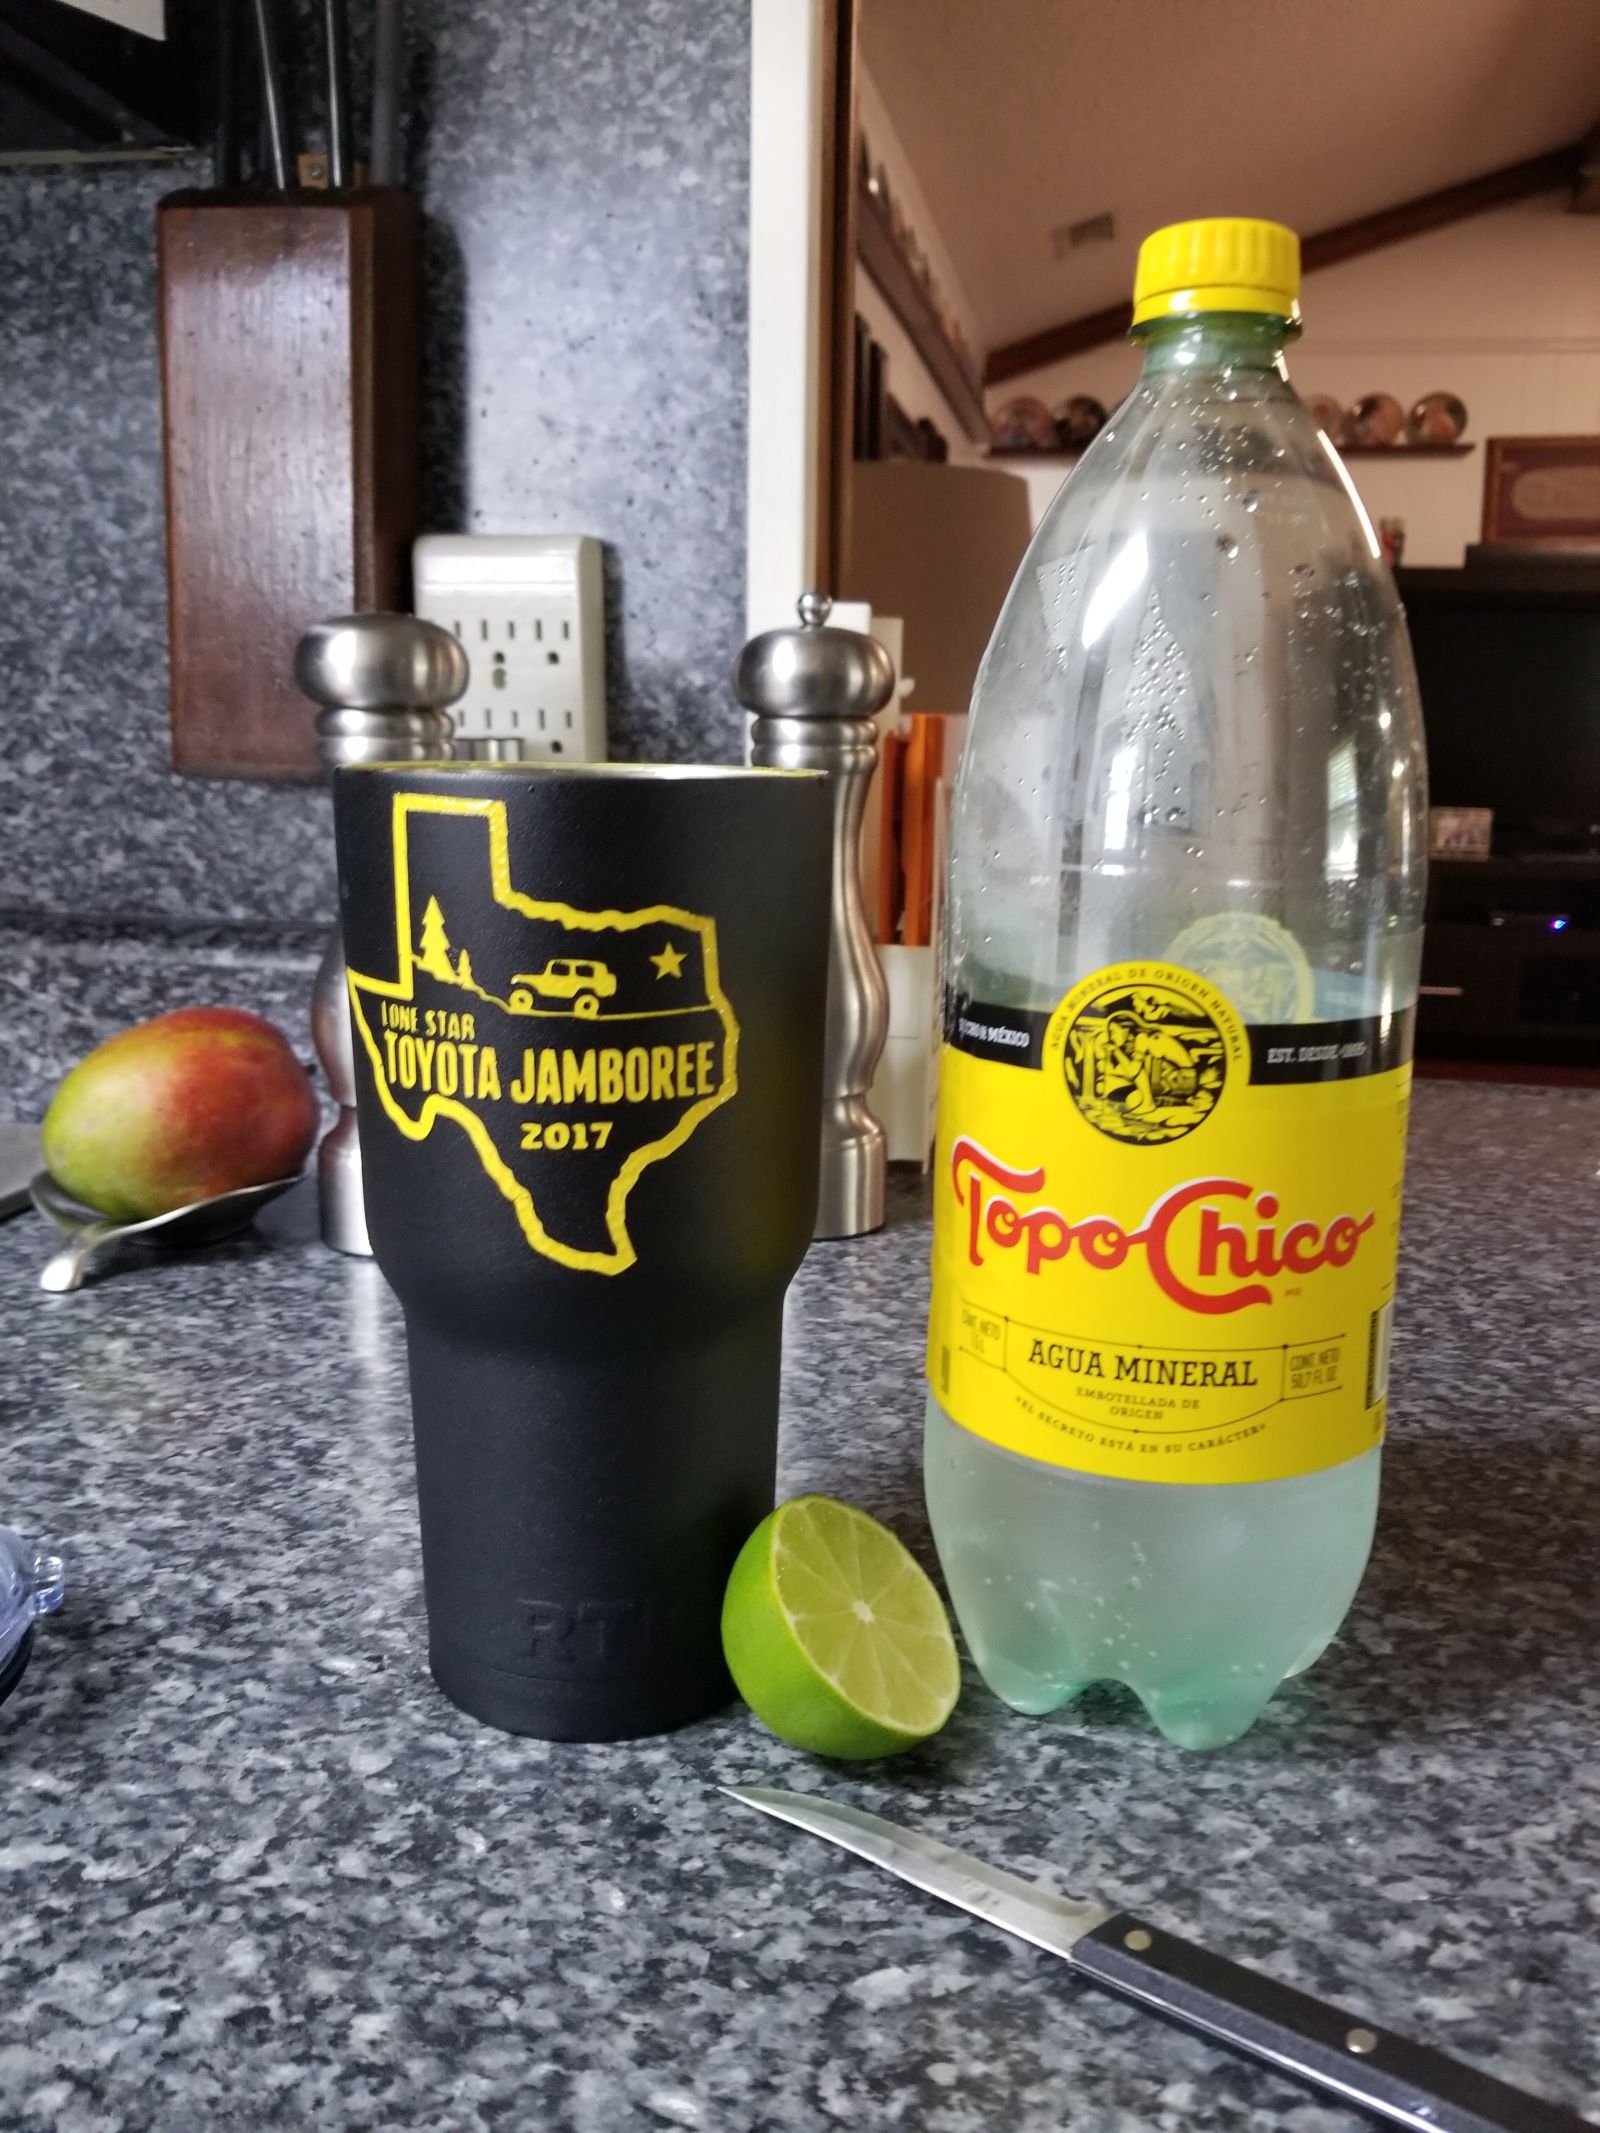 Topo Chico and a fresh lime in my Rtic cup I won at the Lone Star Toyota Jamboree.